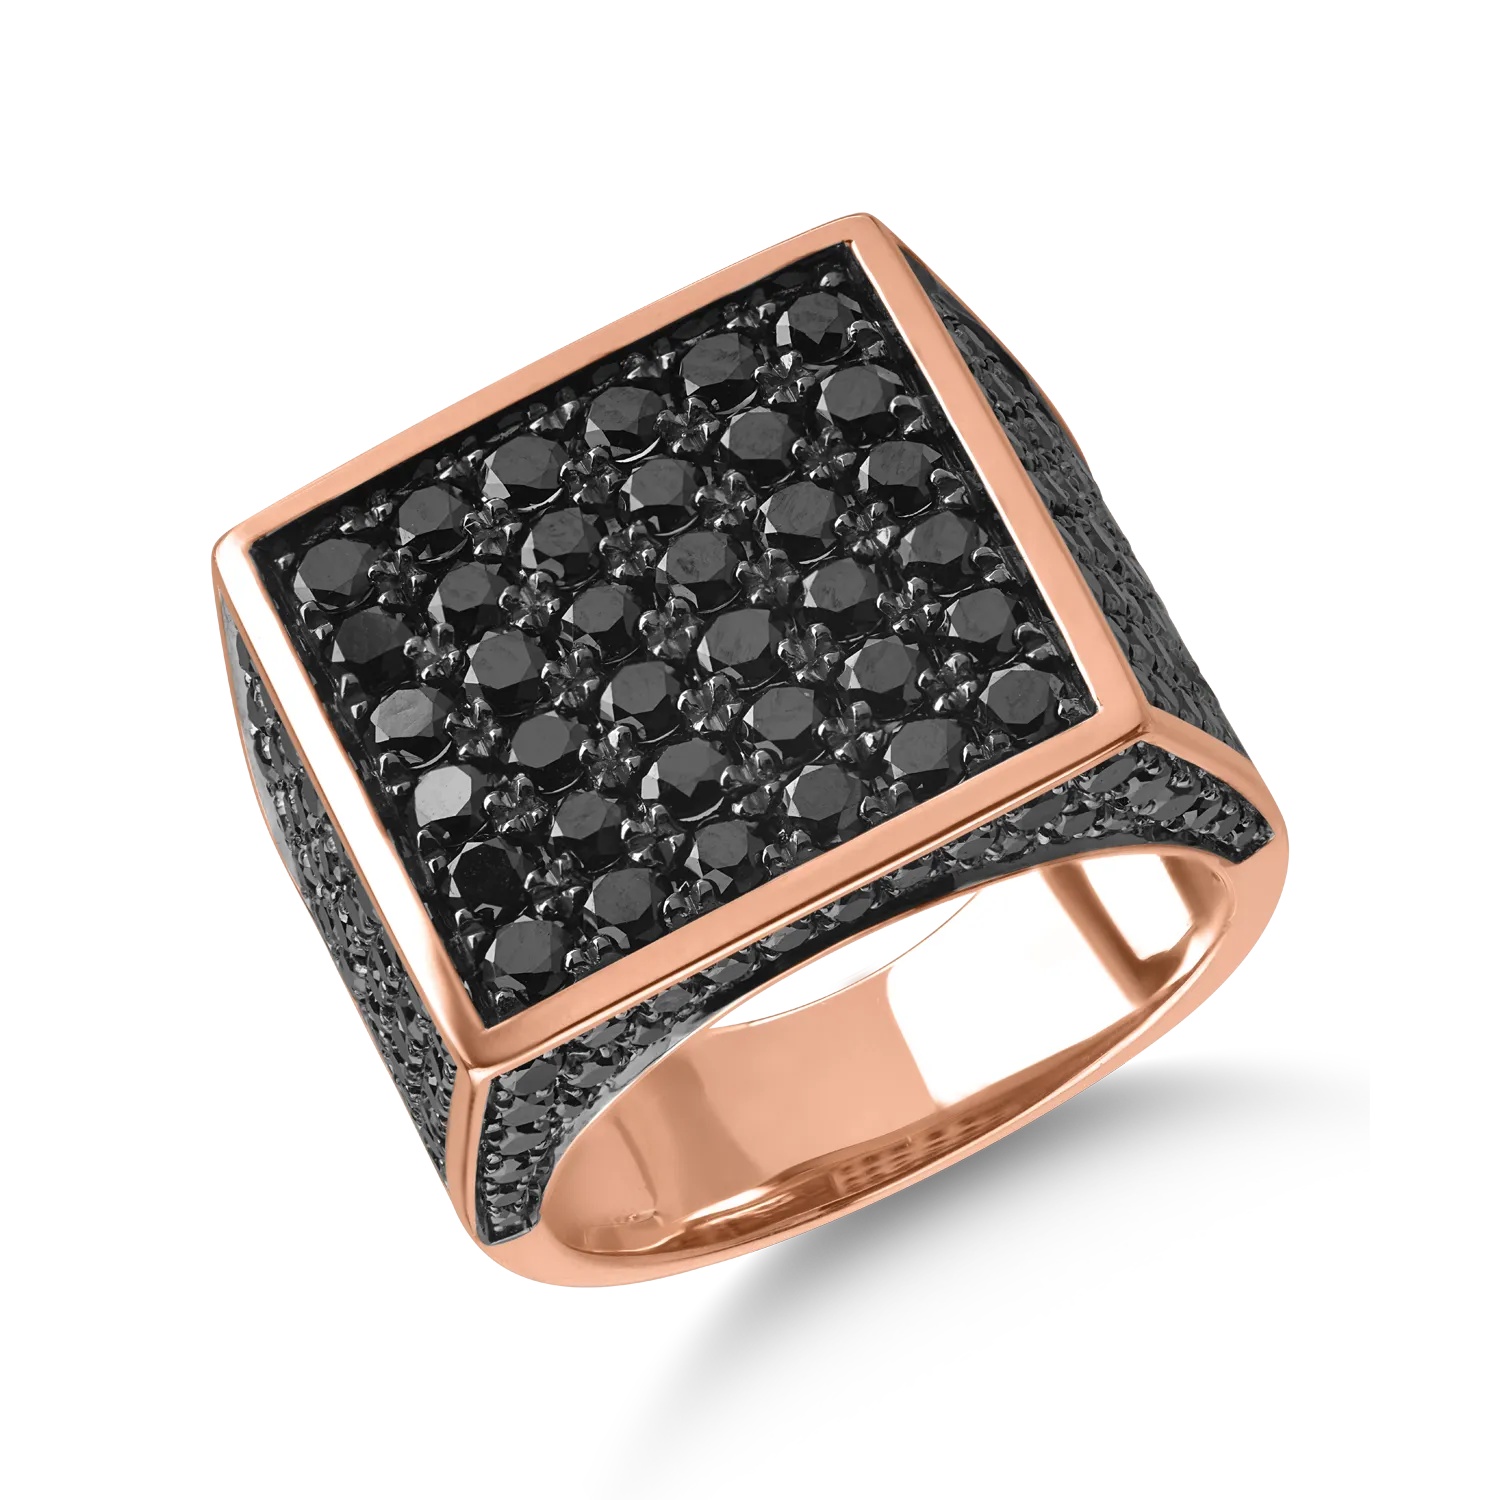 Rose gold ring with 2.78ct black diamonds